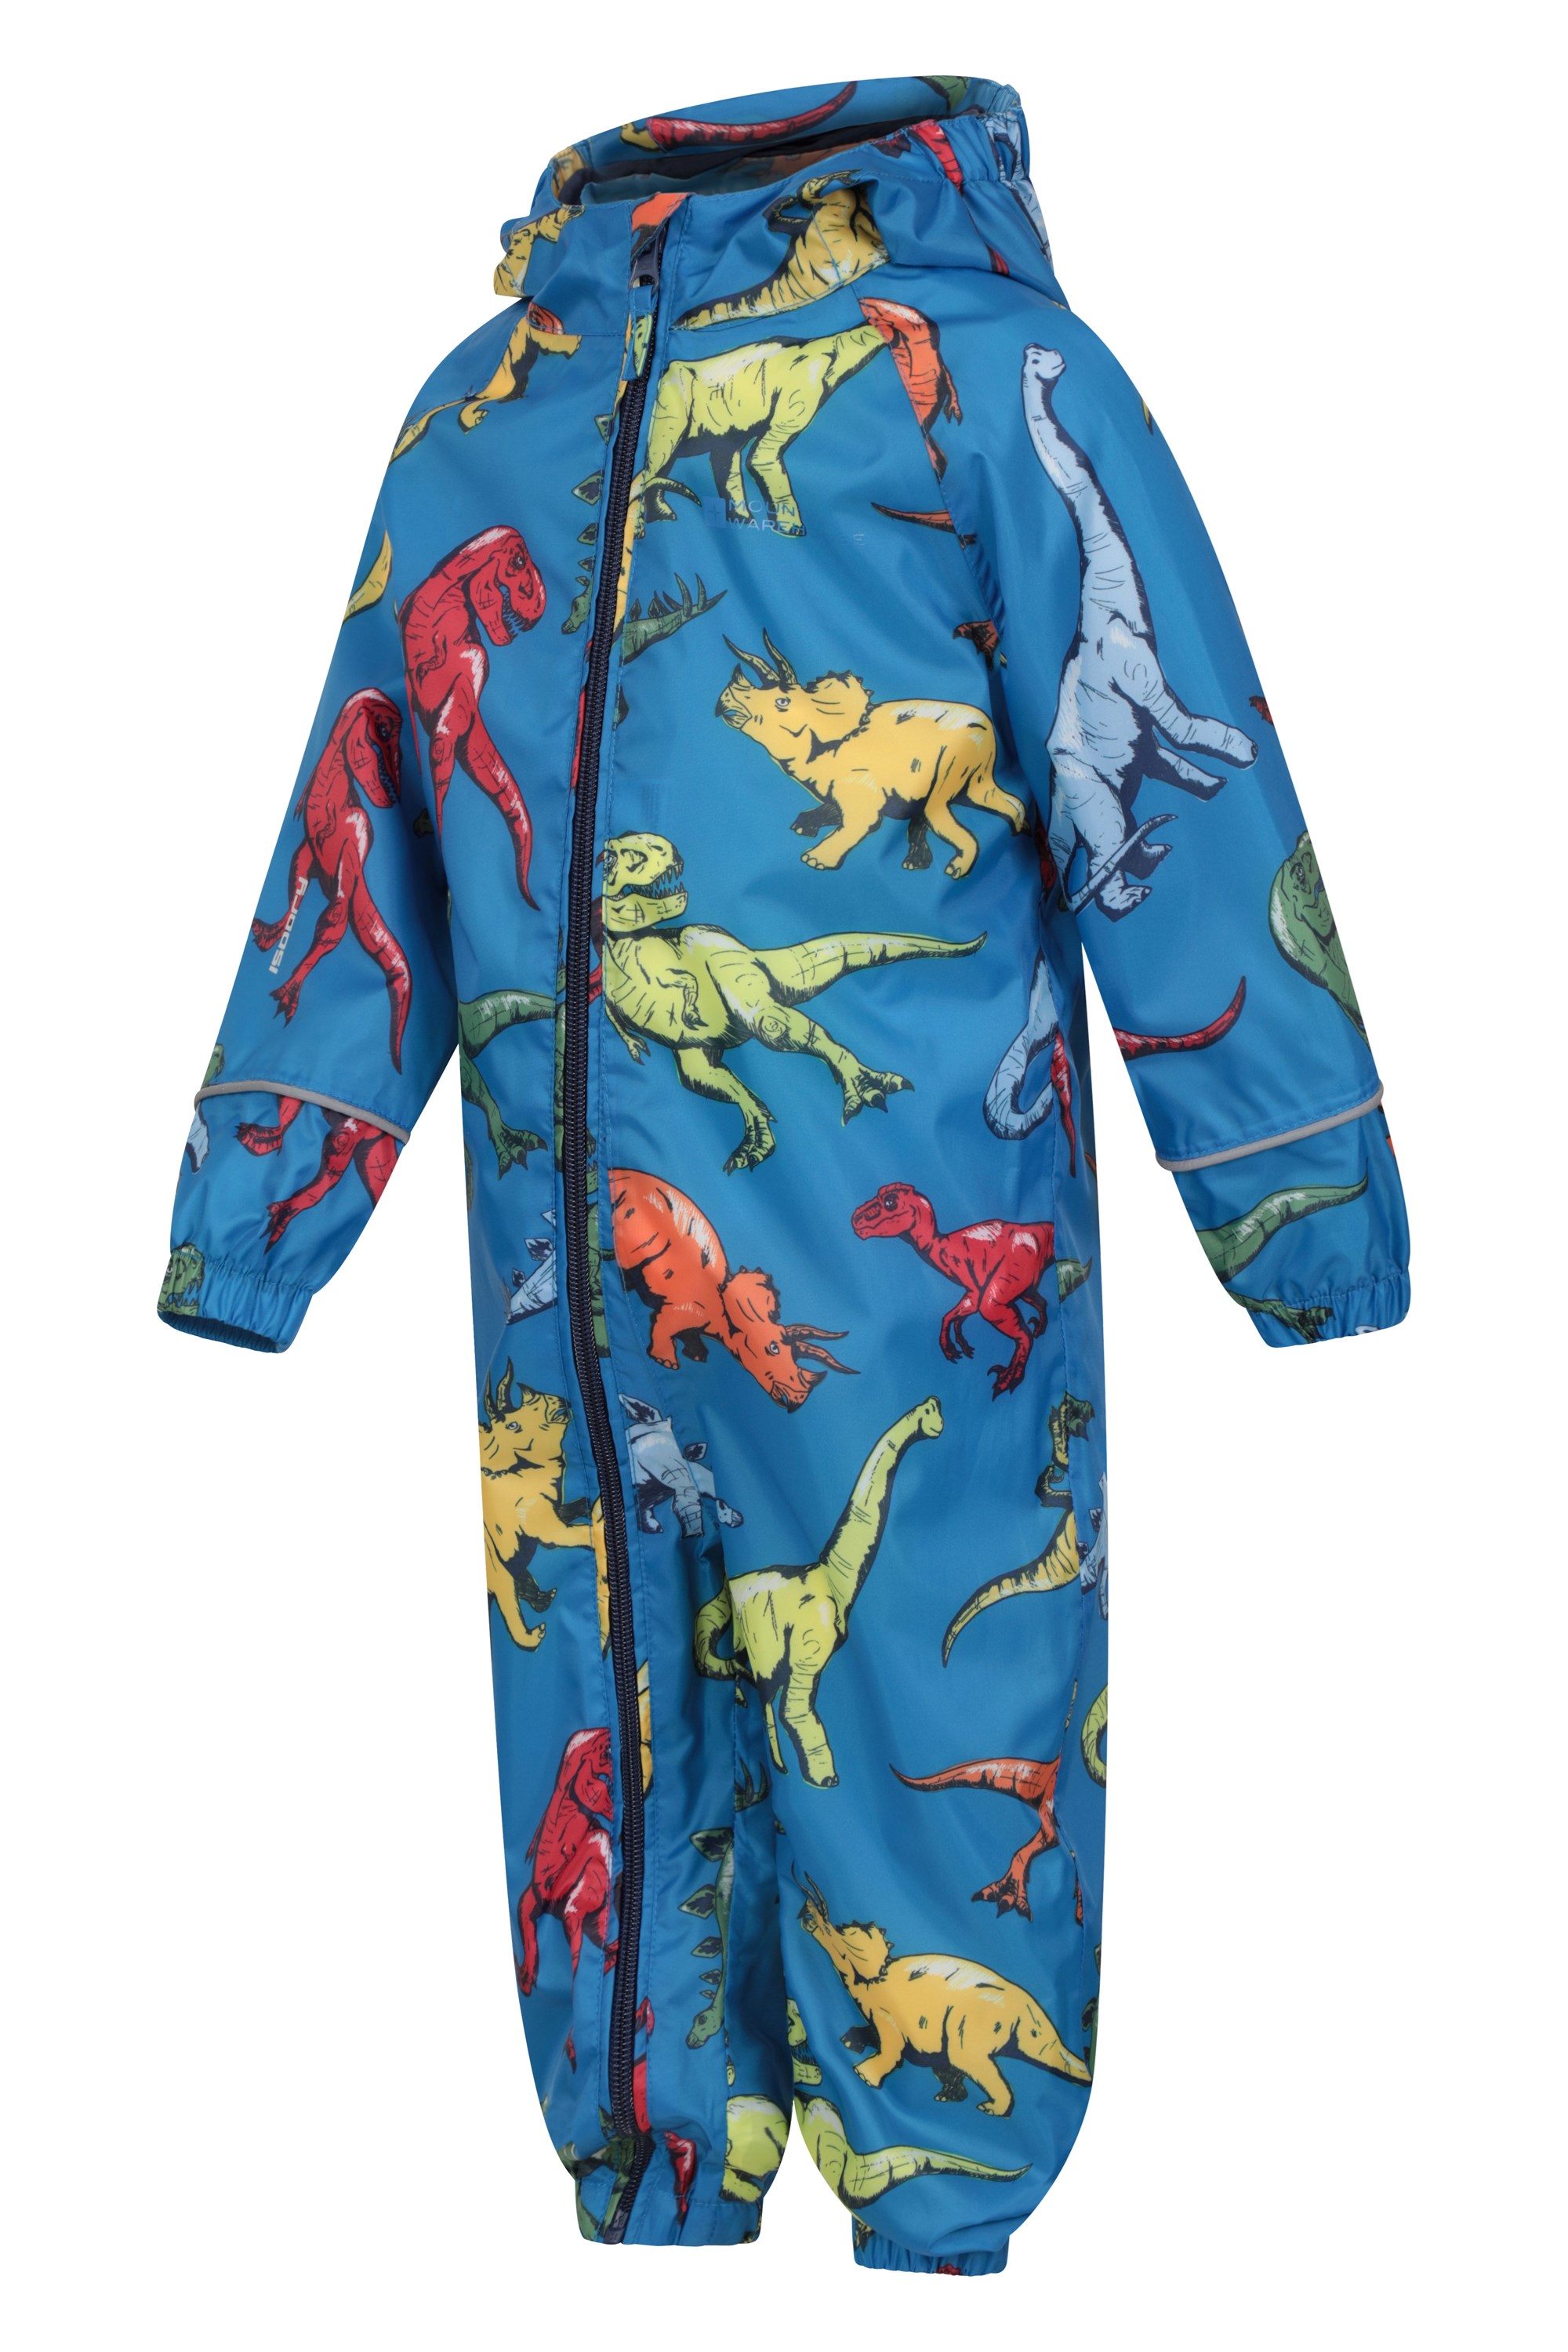 Mountain Warehouse Boys Puddle Suit All In One Age 2-3 Mountain Warehouse 24-36 Dinosaur Rain 